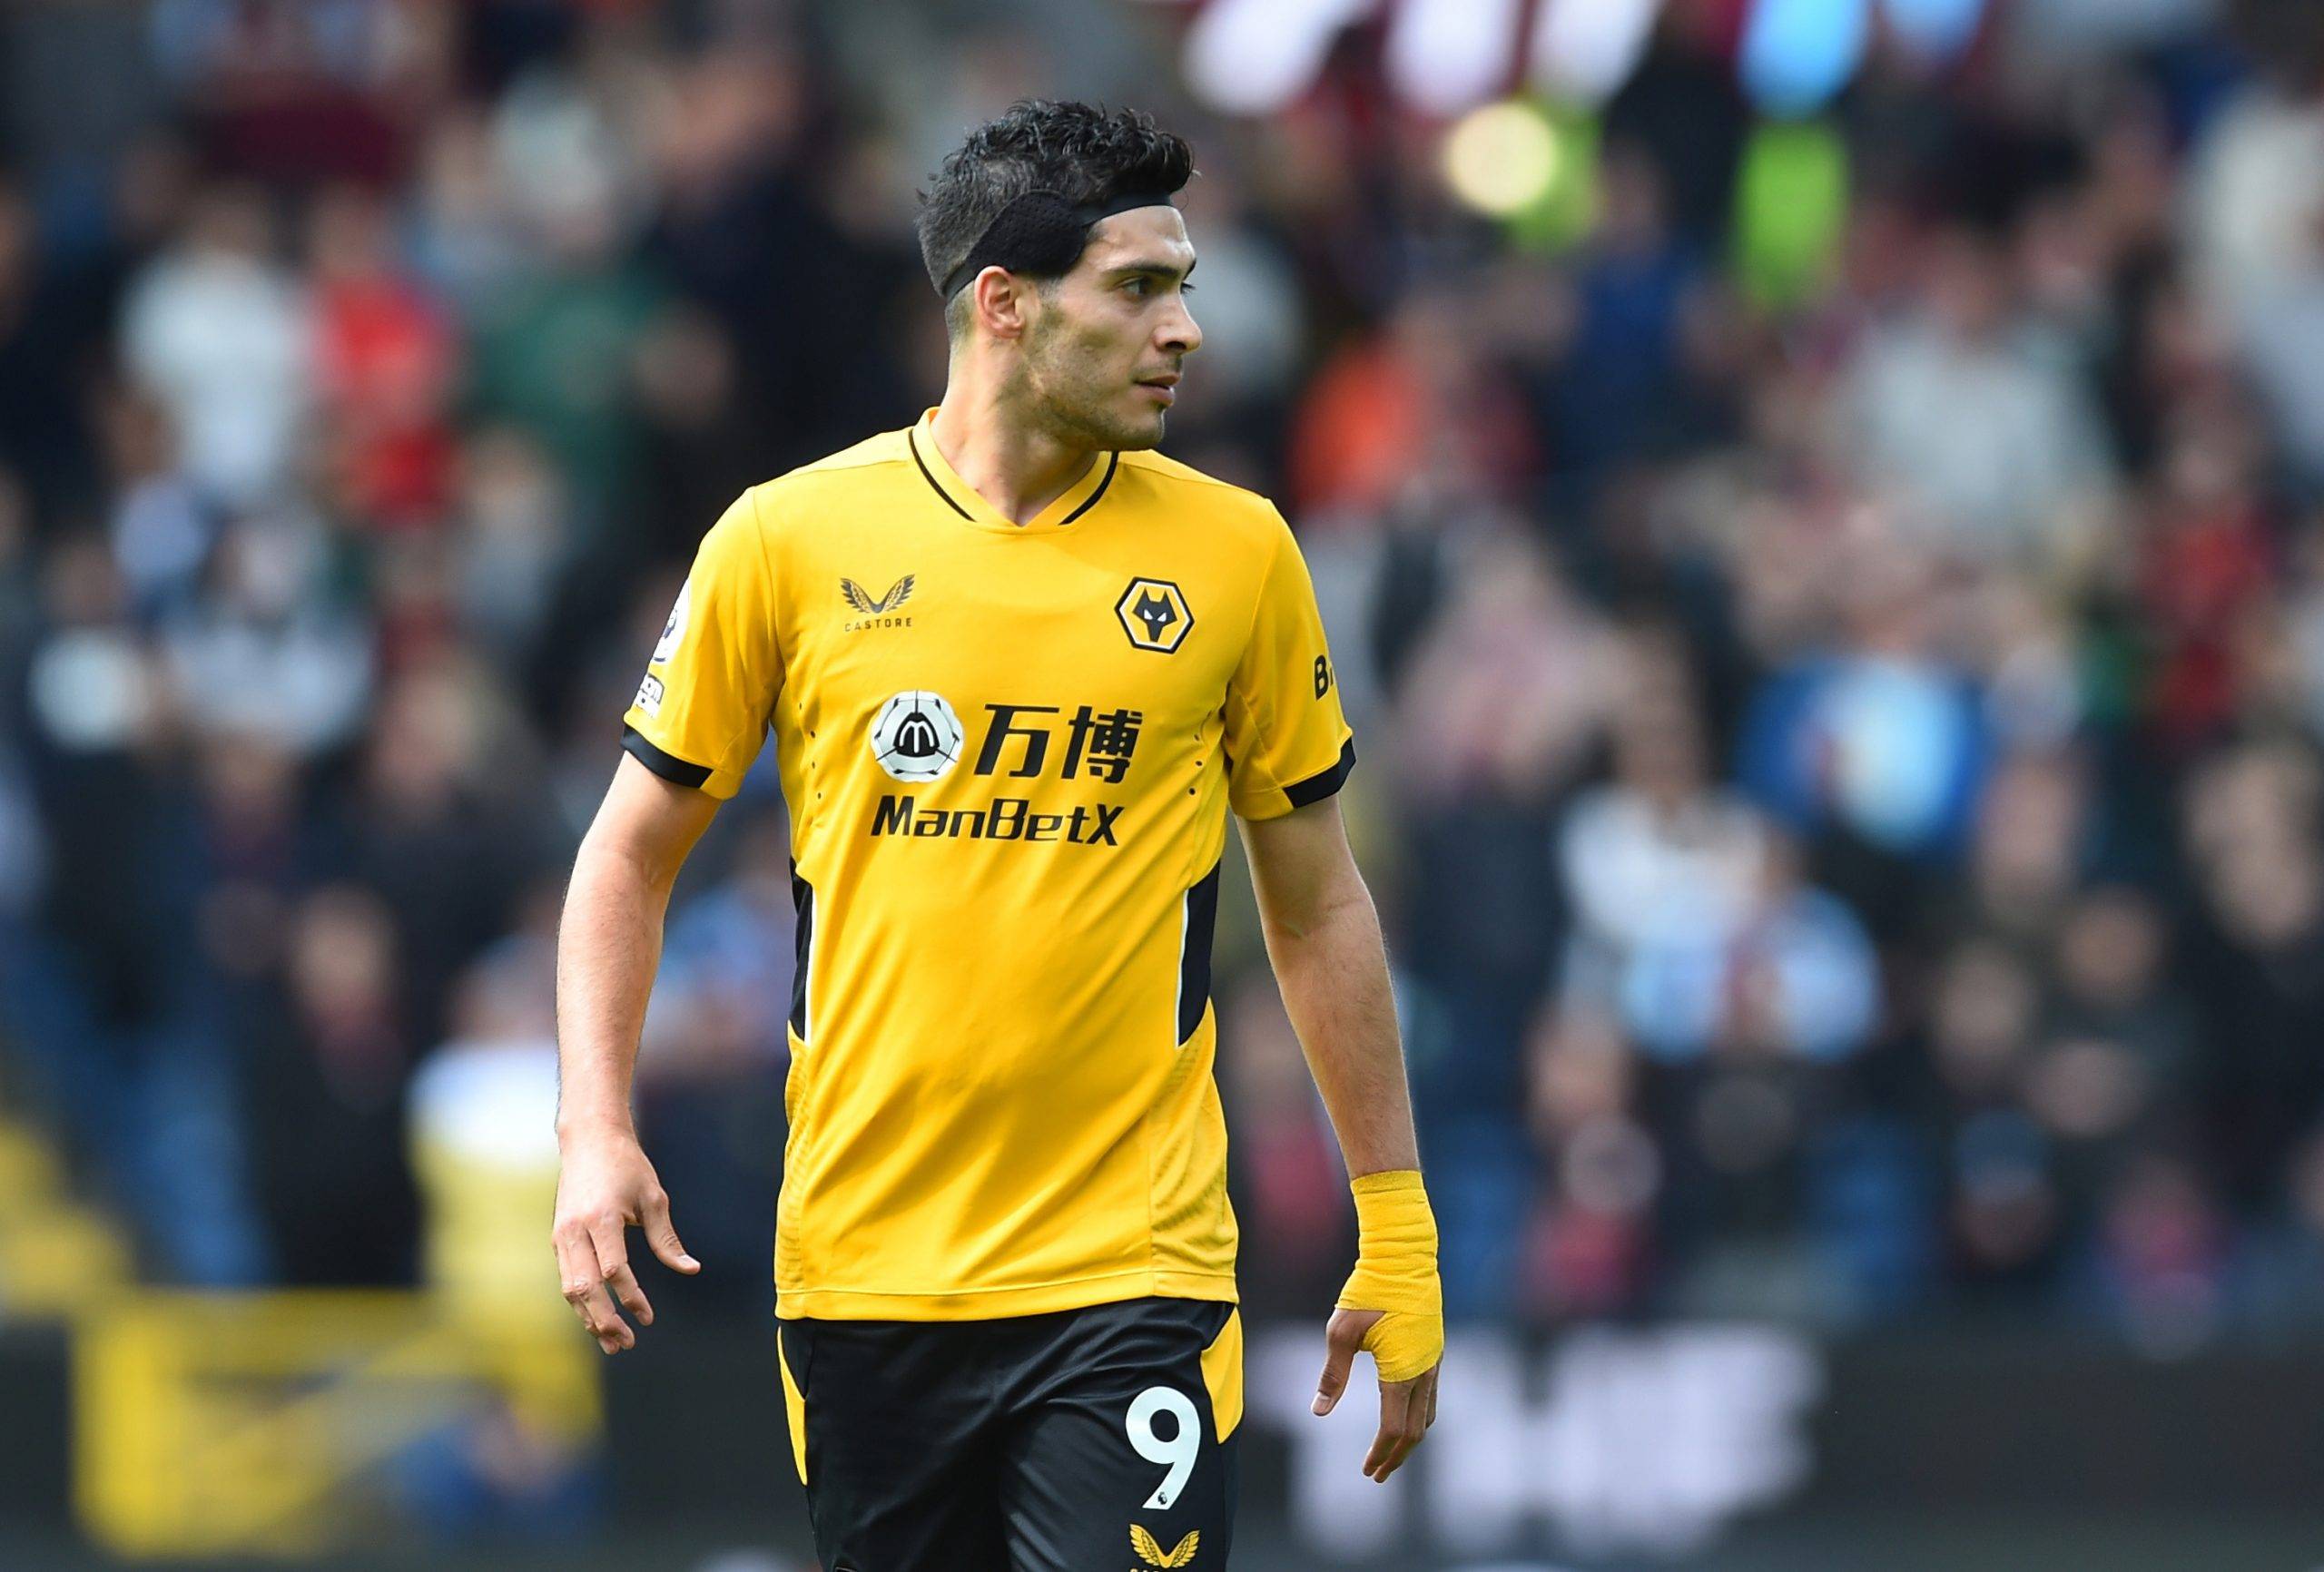 Wolves: Raul Jimenez expected to leave this summer - Follow up